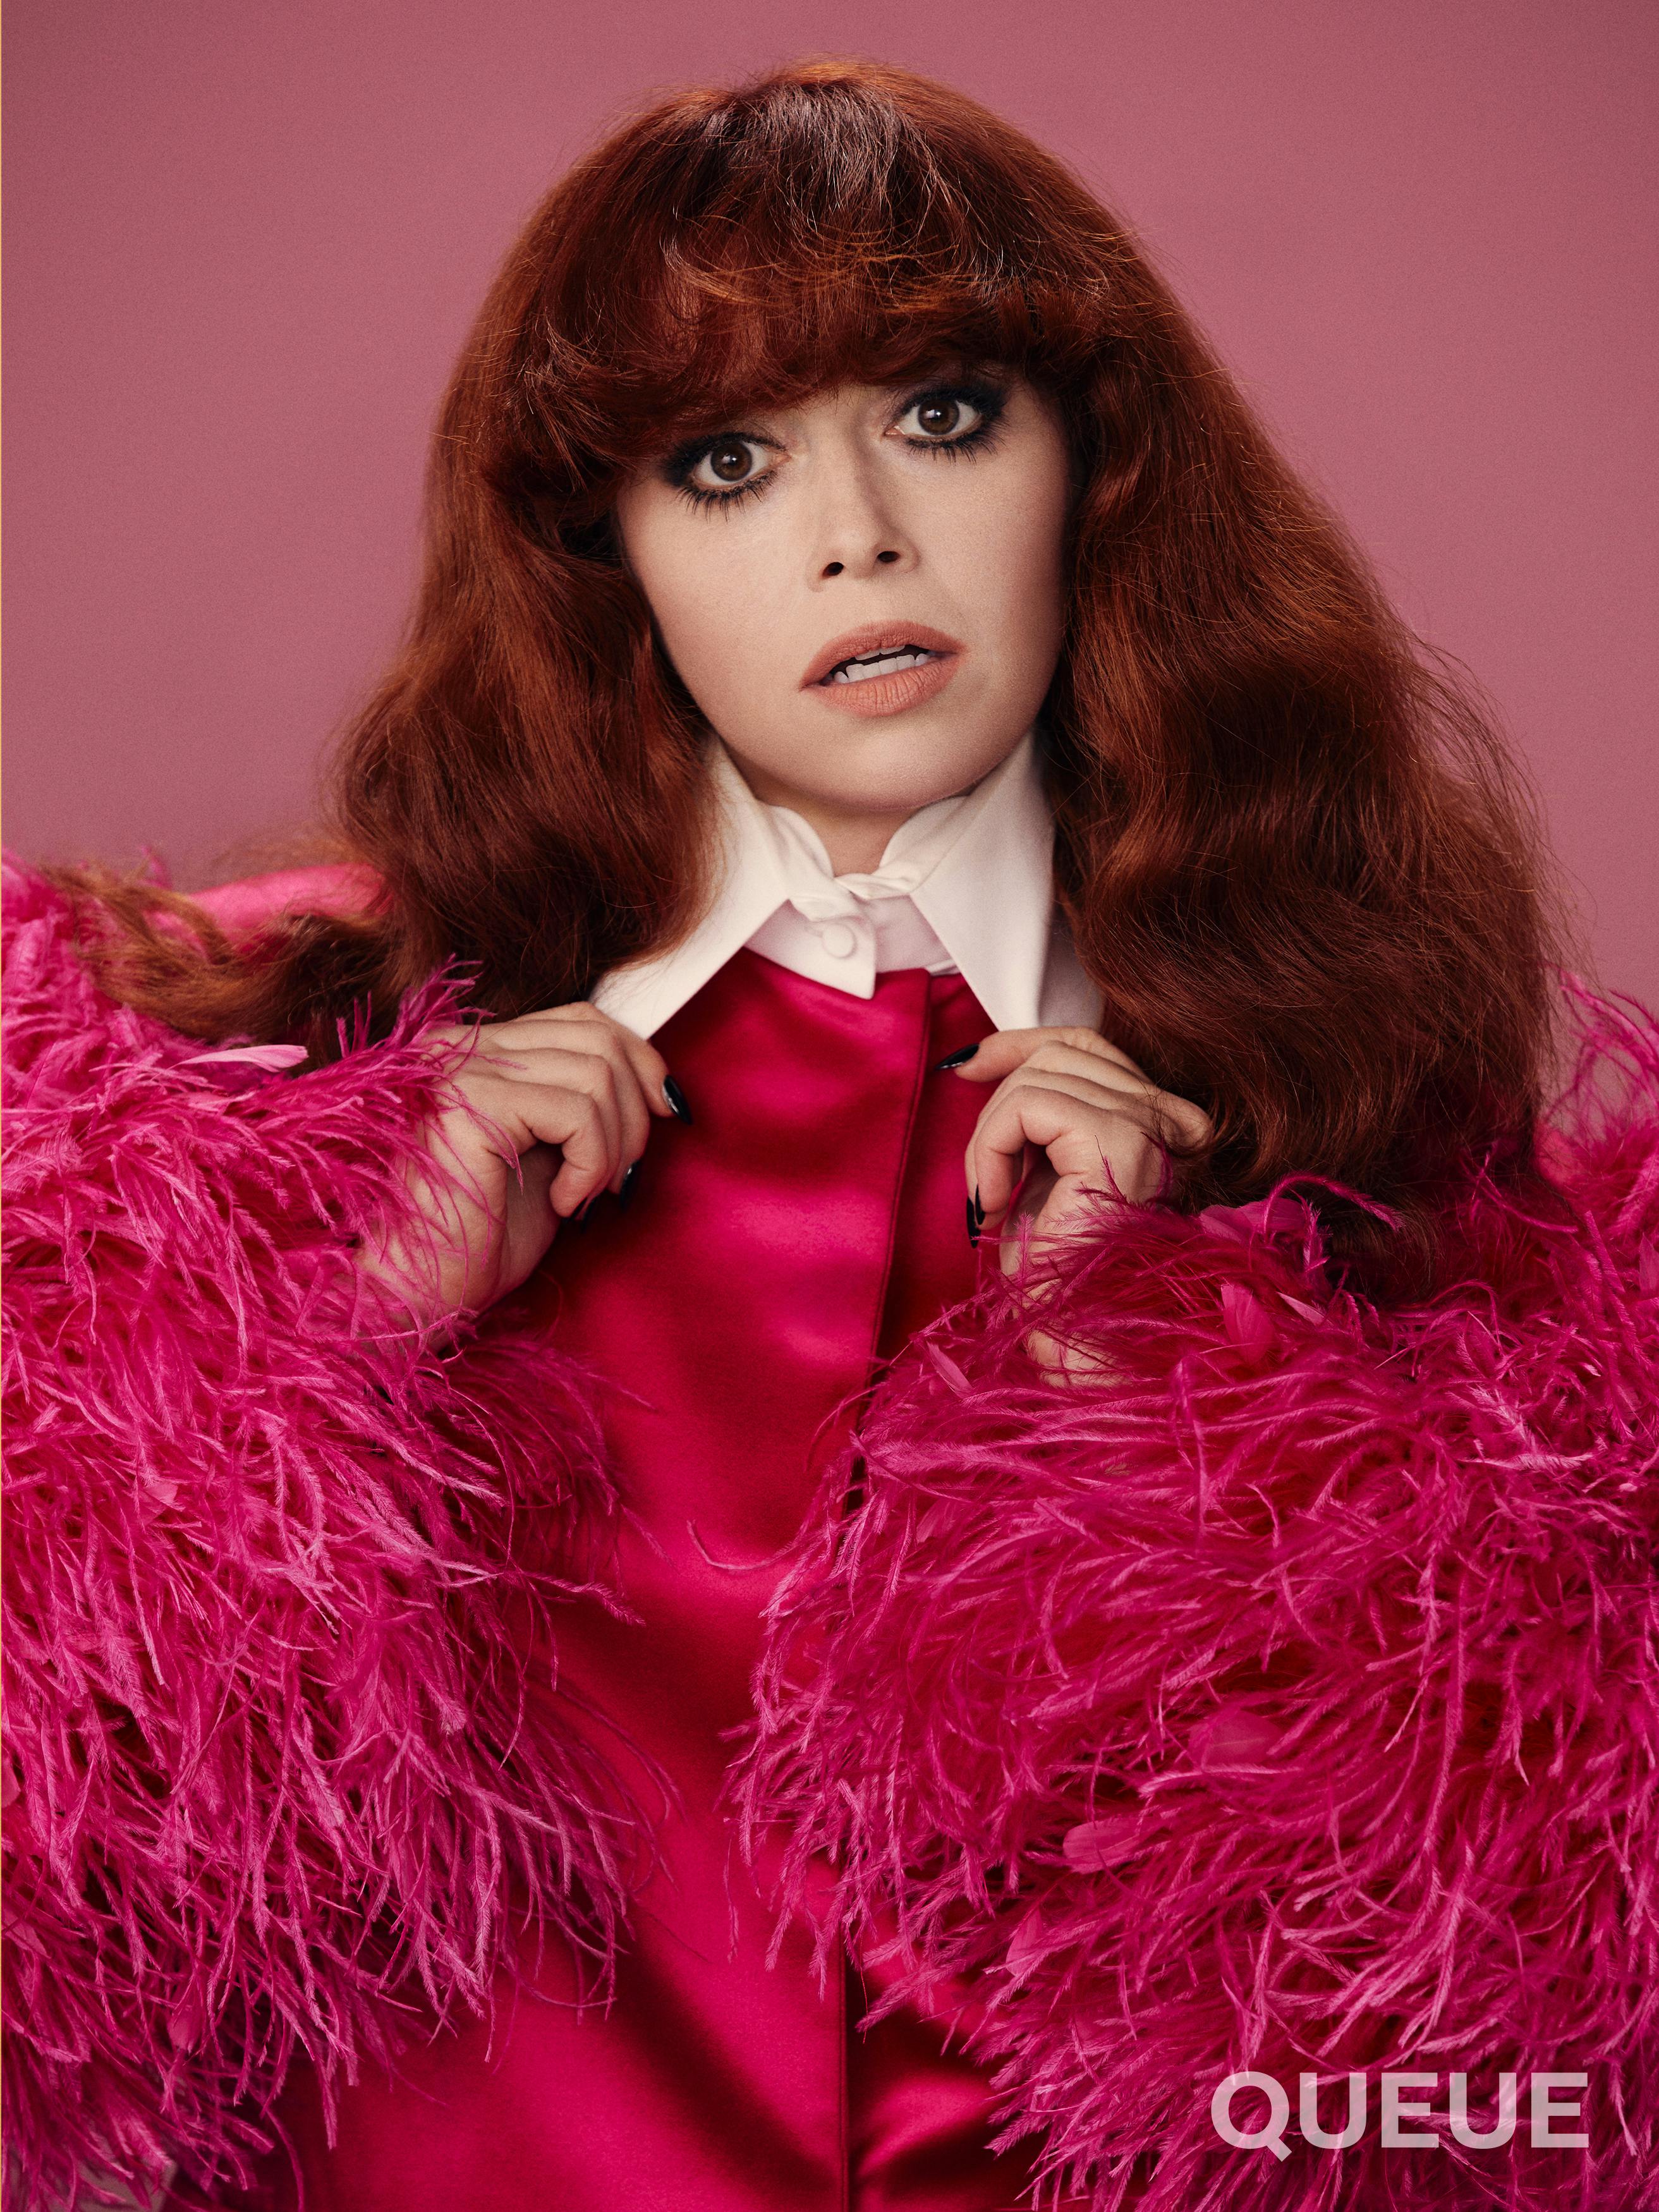 Natasha Lyonne wears a pink top with feathered sleeves, and a dramatic white collar.